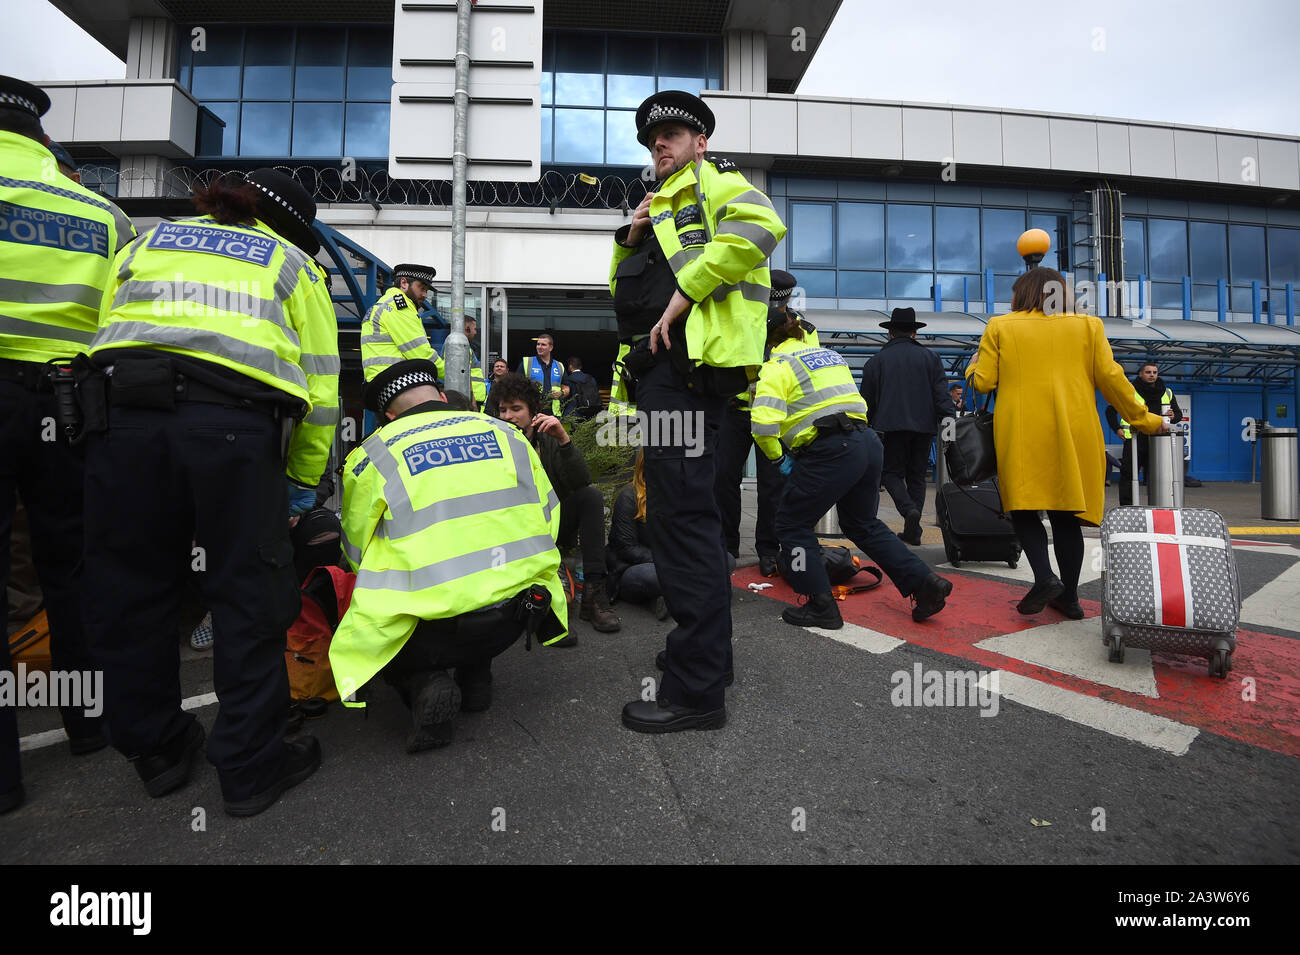 Passengers walk past with suitcases as police search protesters, after activists staged a 'Hong Kong style' blockage of the exit from the train station to City Airport, London, during an Extinction Rebellion climate change protest. Stock Photo